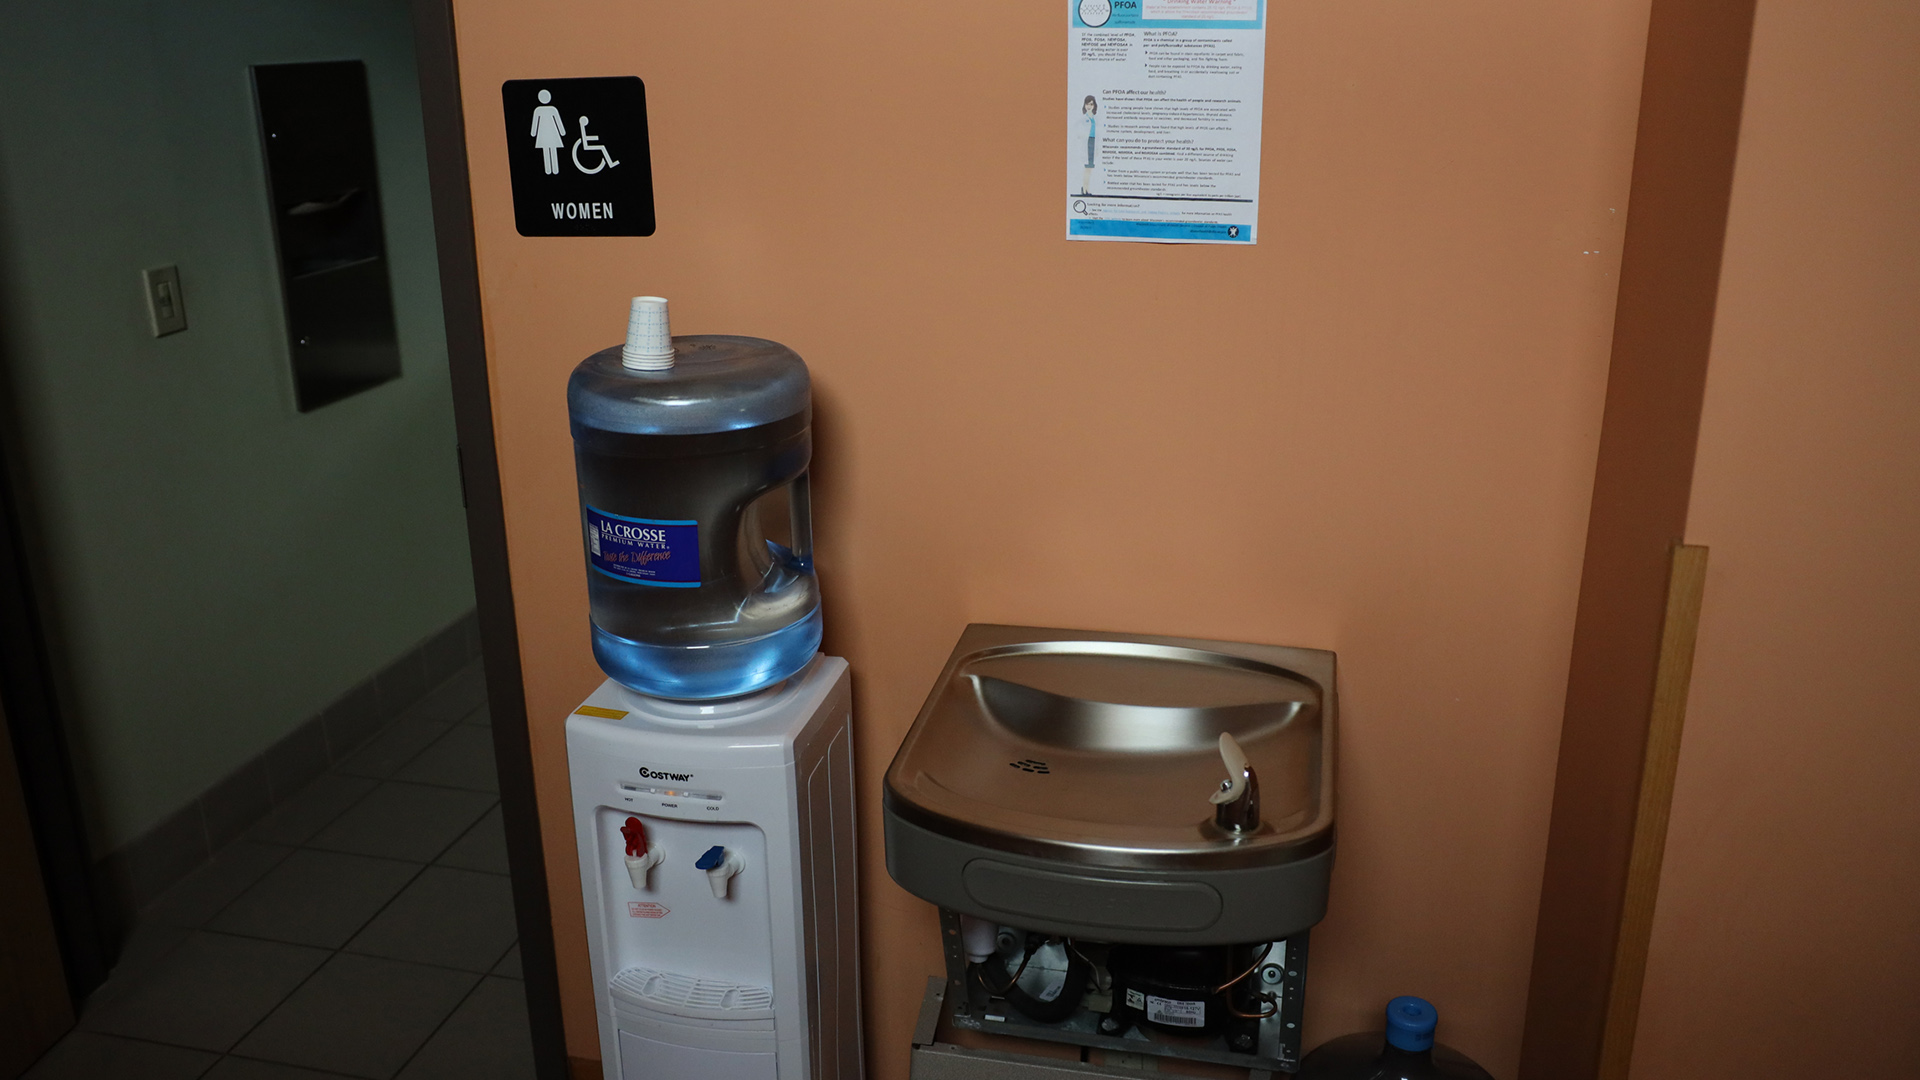 A water dispenser stands next to a drinking water fountain that has been disconnected from a water connection, with a flyer warning about PFAS attached to the backing wall, adjacent to a door to a women's restroom and accompanying signage.